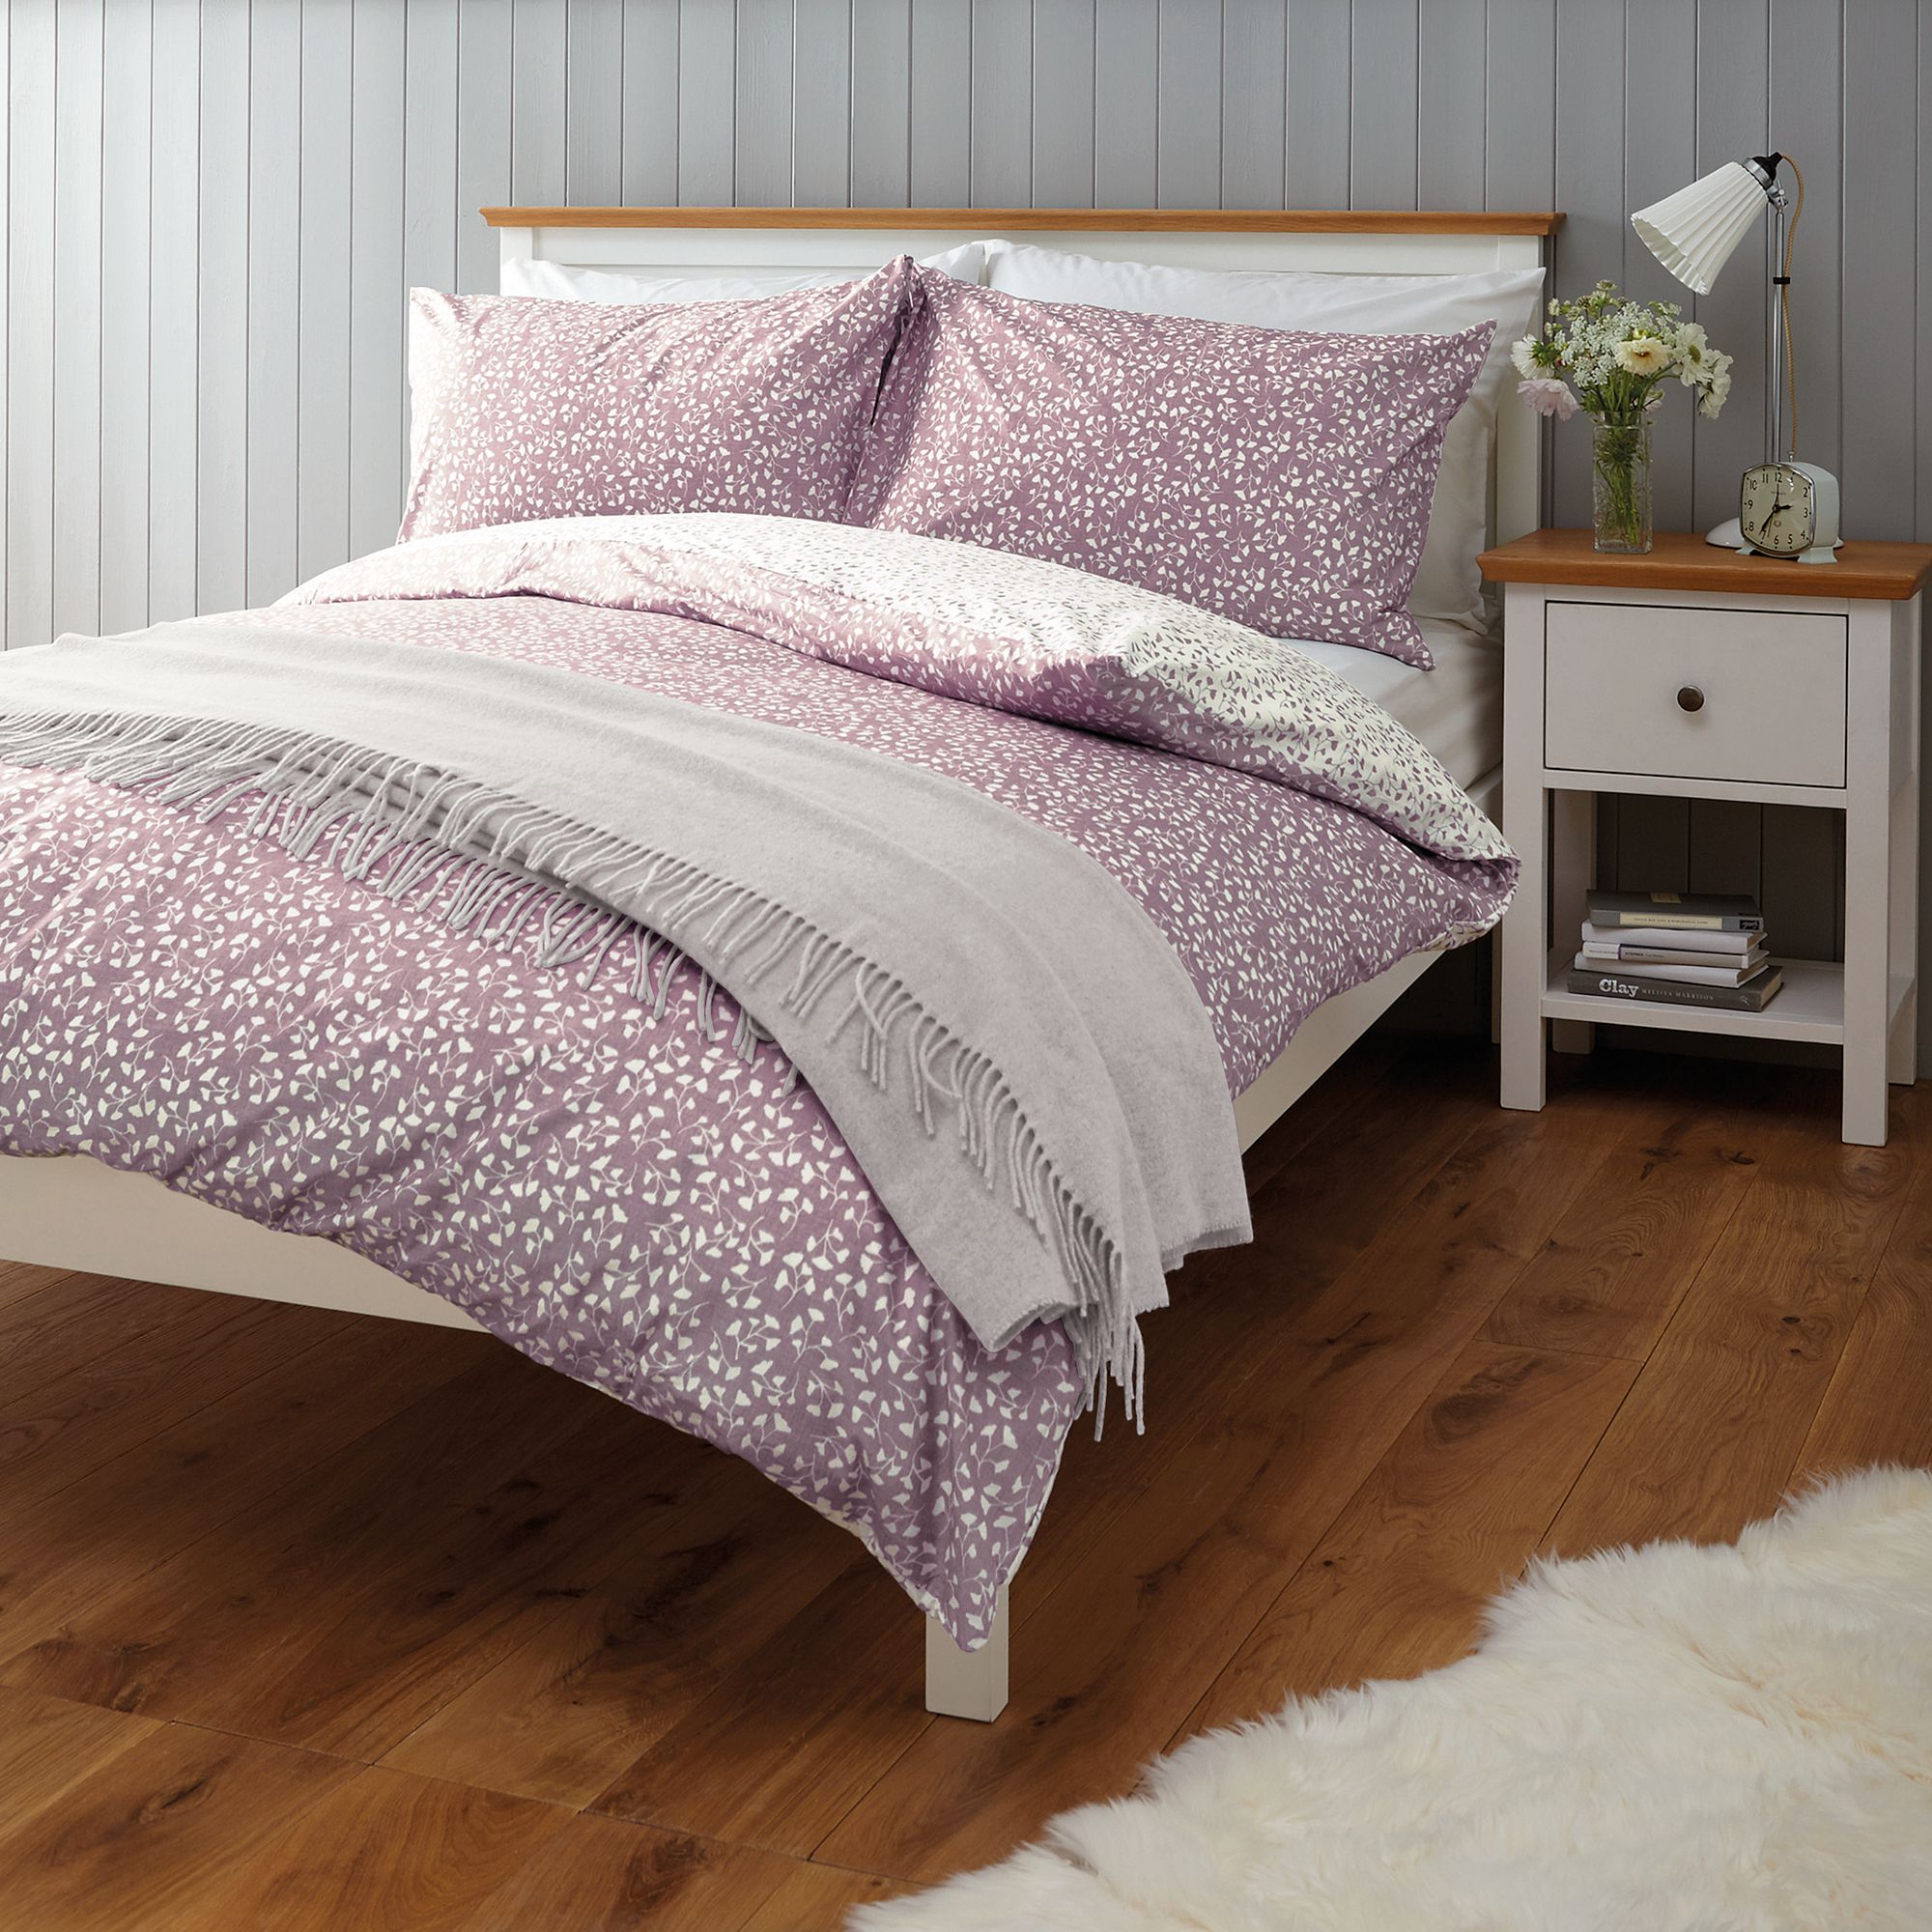 John Lewis & Partners Crisp and Fresh Country Arley Bedding, Cassis